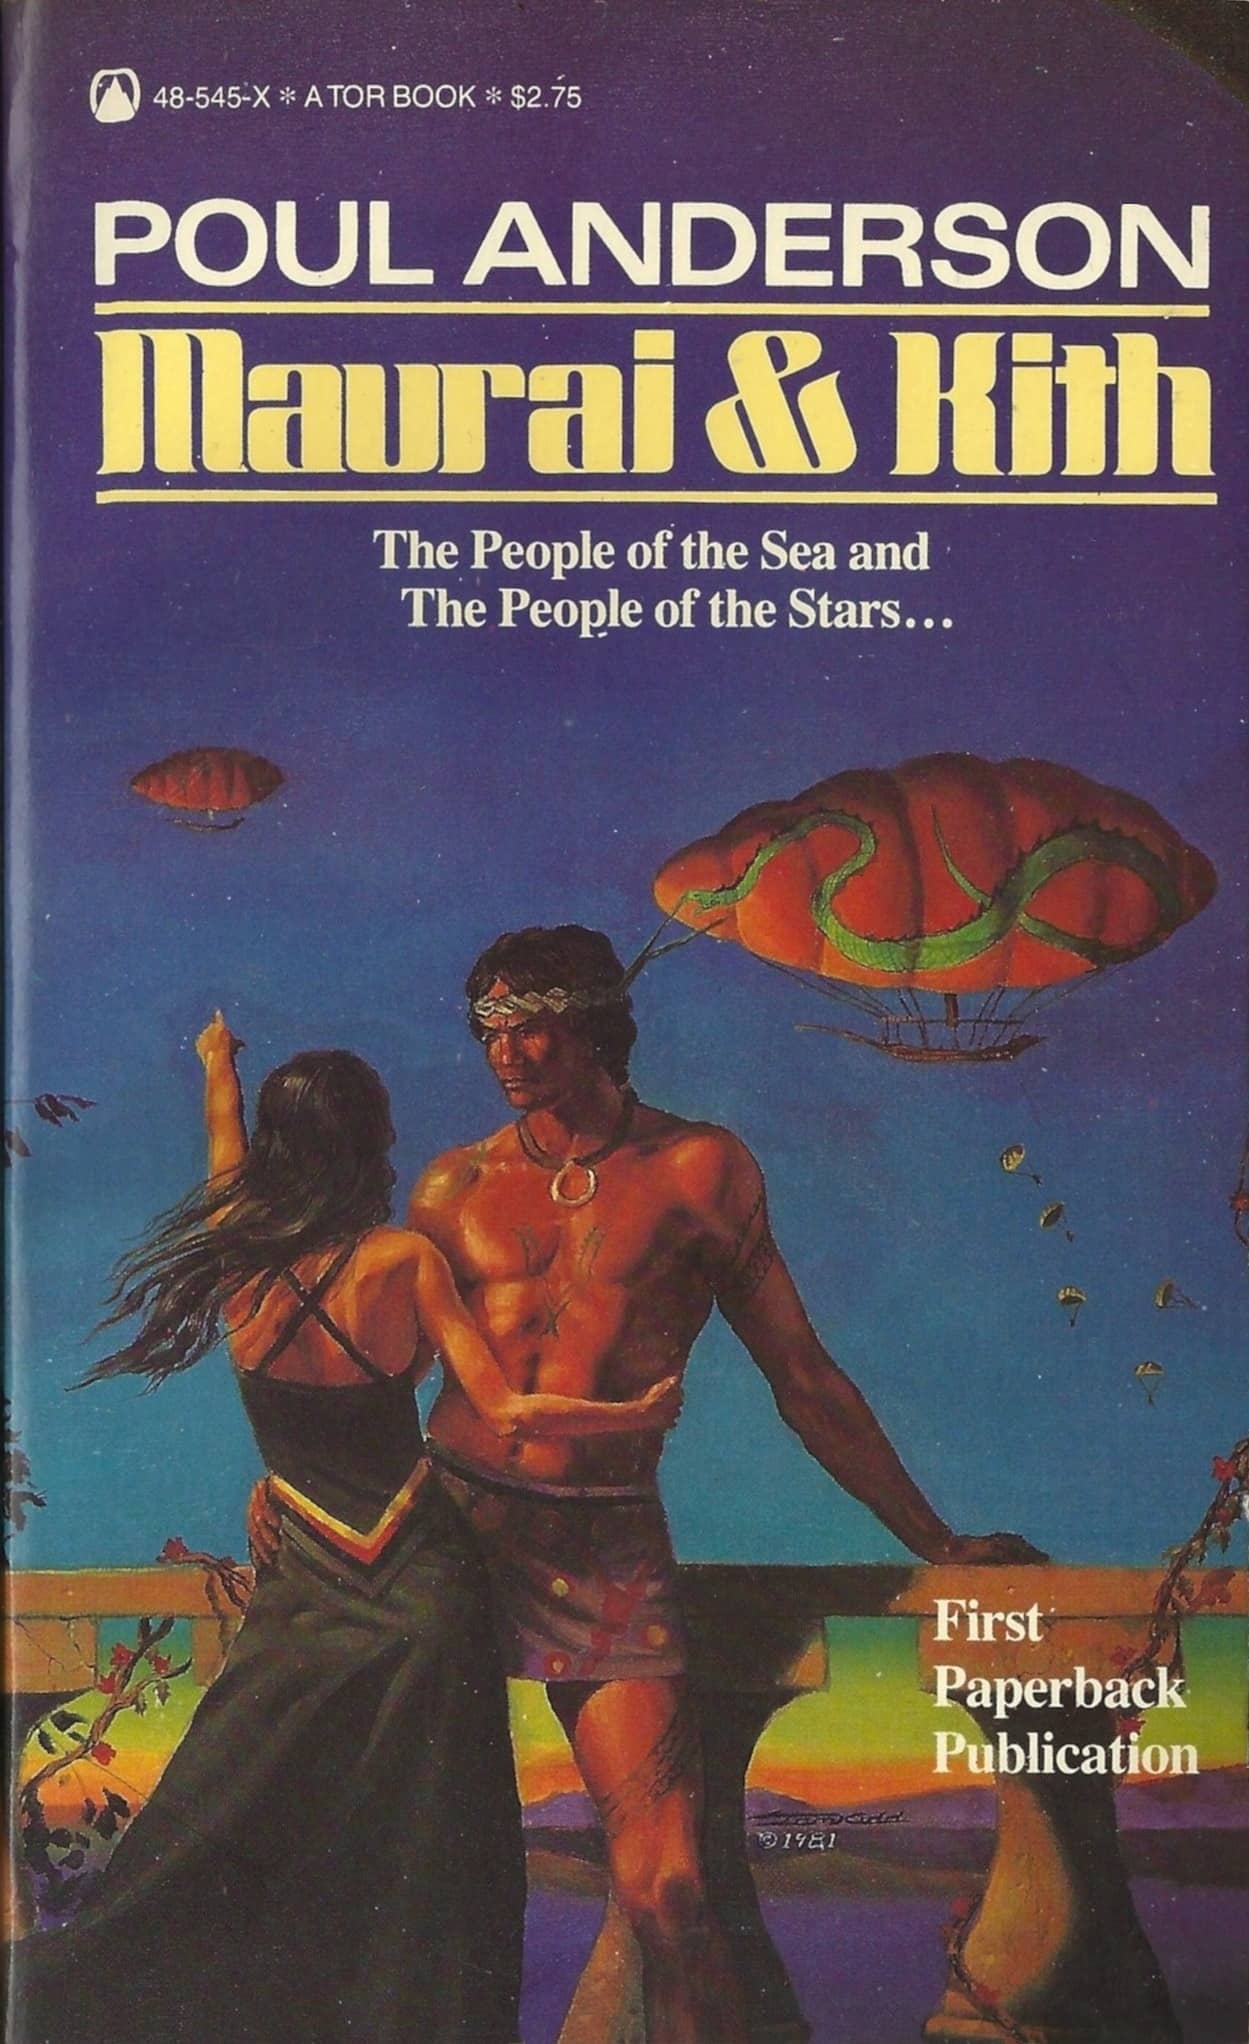 Image - cover of Maurai & Kith by Poul Anderson